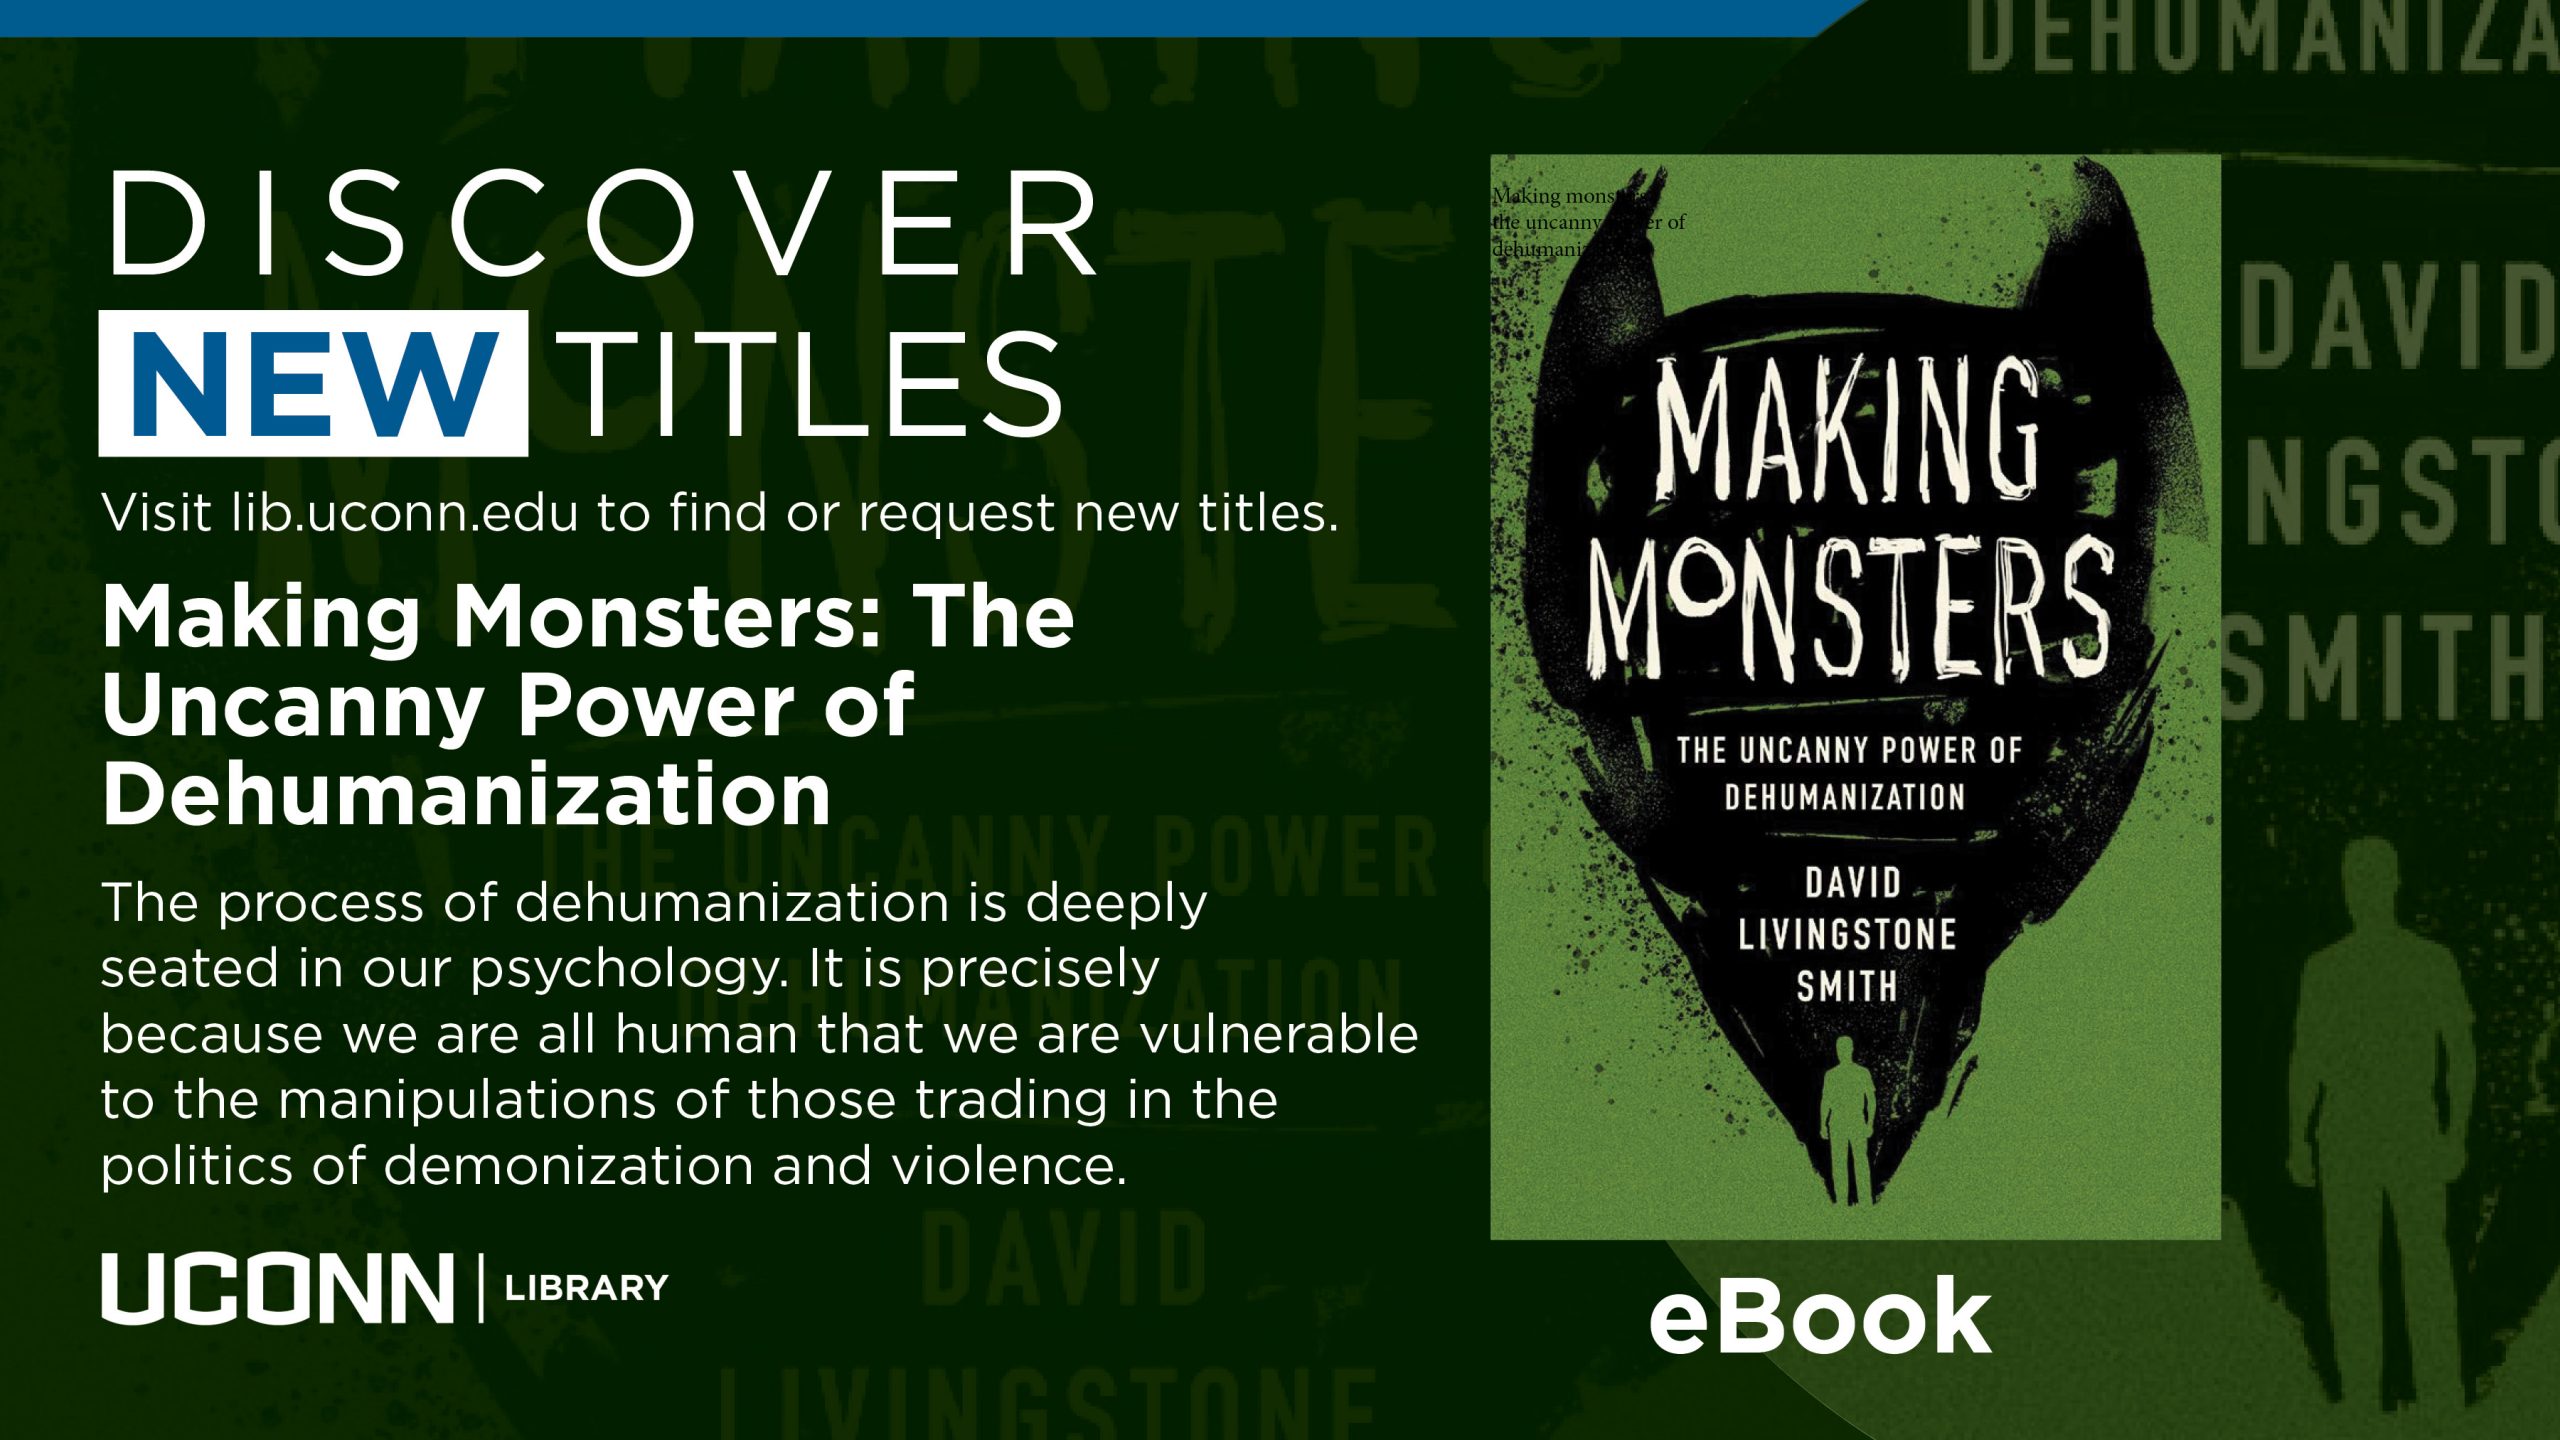 Green marketing screen with image of a featured book by David Livingstone Smith, and the text, “Discover new titles. Visit lib.uconn.edu to find or request new titles. Making Monsters: The Uncanny Power of Dehumanization. The process of dehumanization is deeply seated in our psychology. It is precisely because we are all human that we are vulnerable to the manipulations of those trading in the politics of demonization and violence. UConn Library. eBook.”